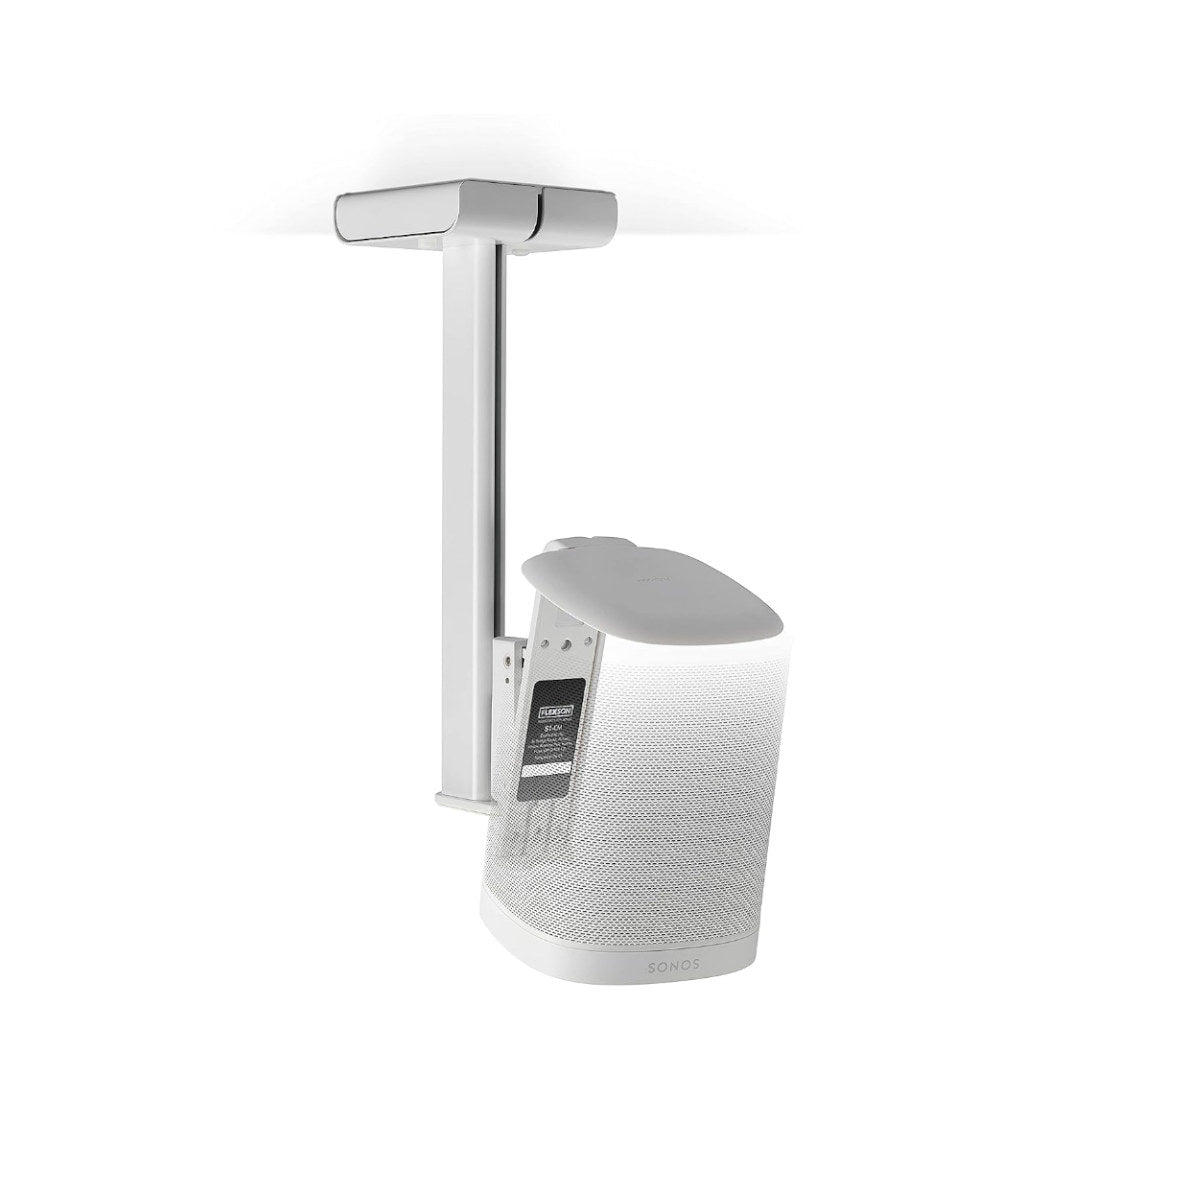 Sonos One Gen 2 with Ceiling Mount (white)